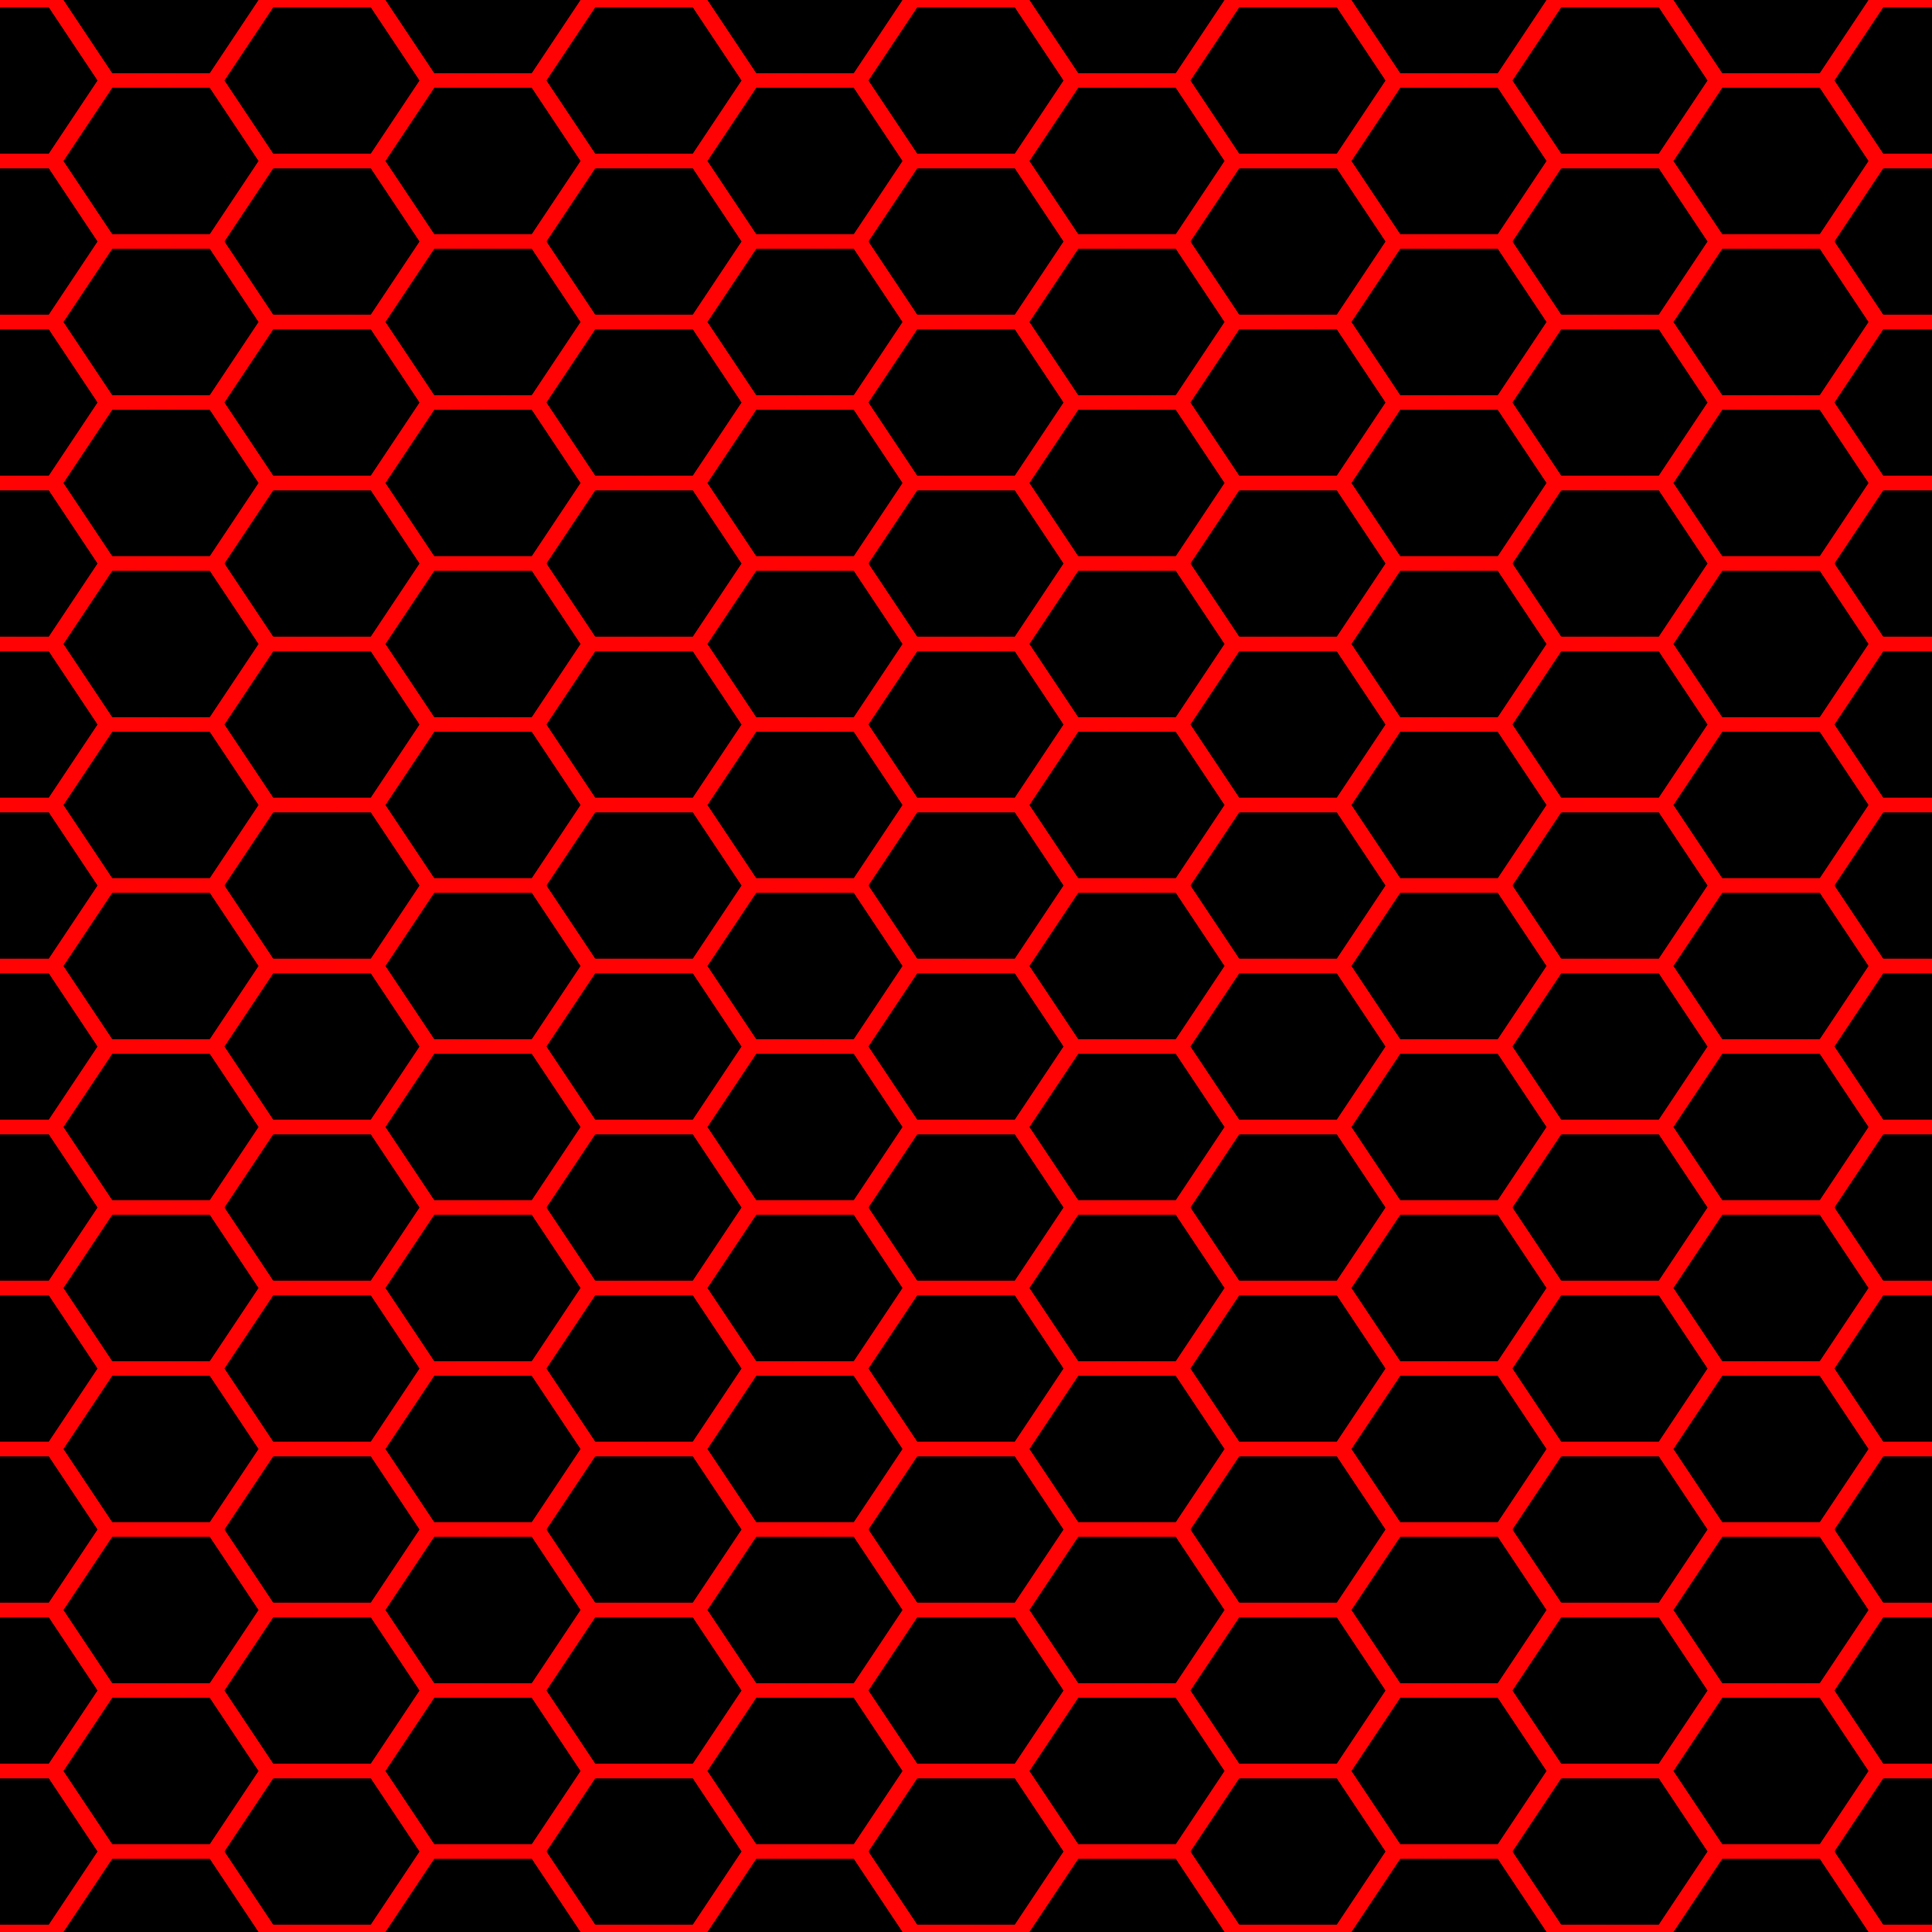 Popular Hexagons images for mobile phone